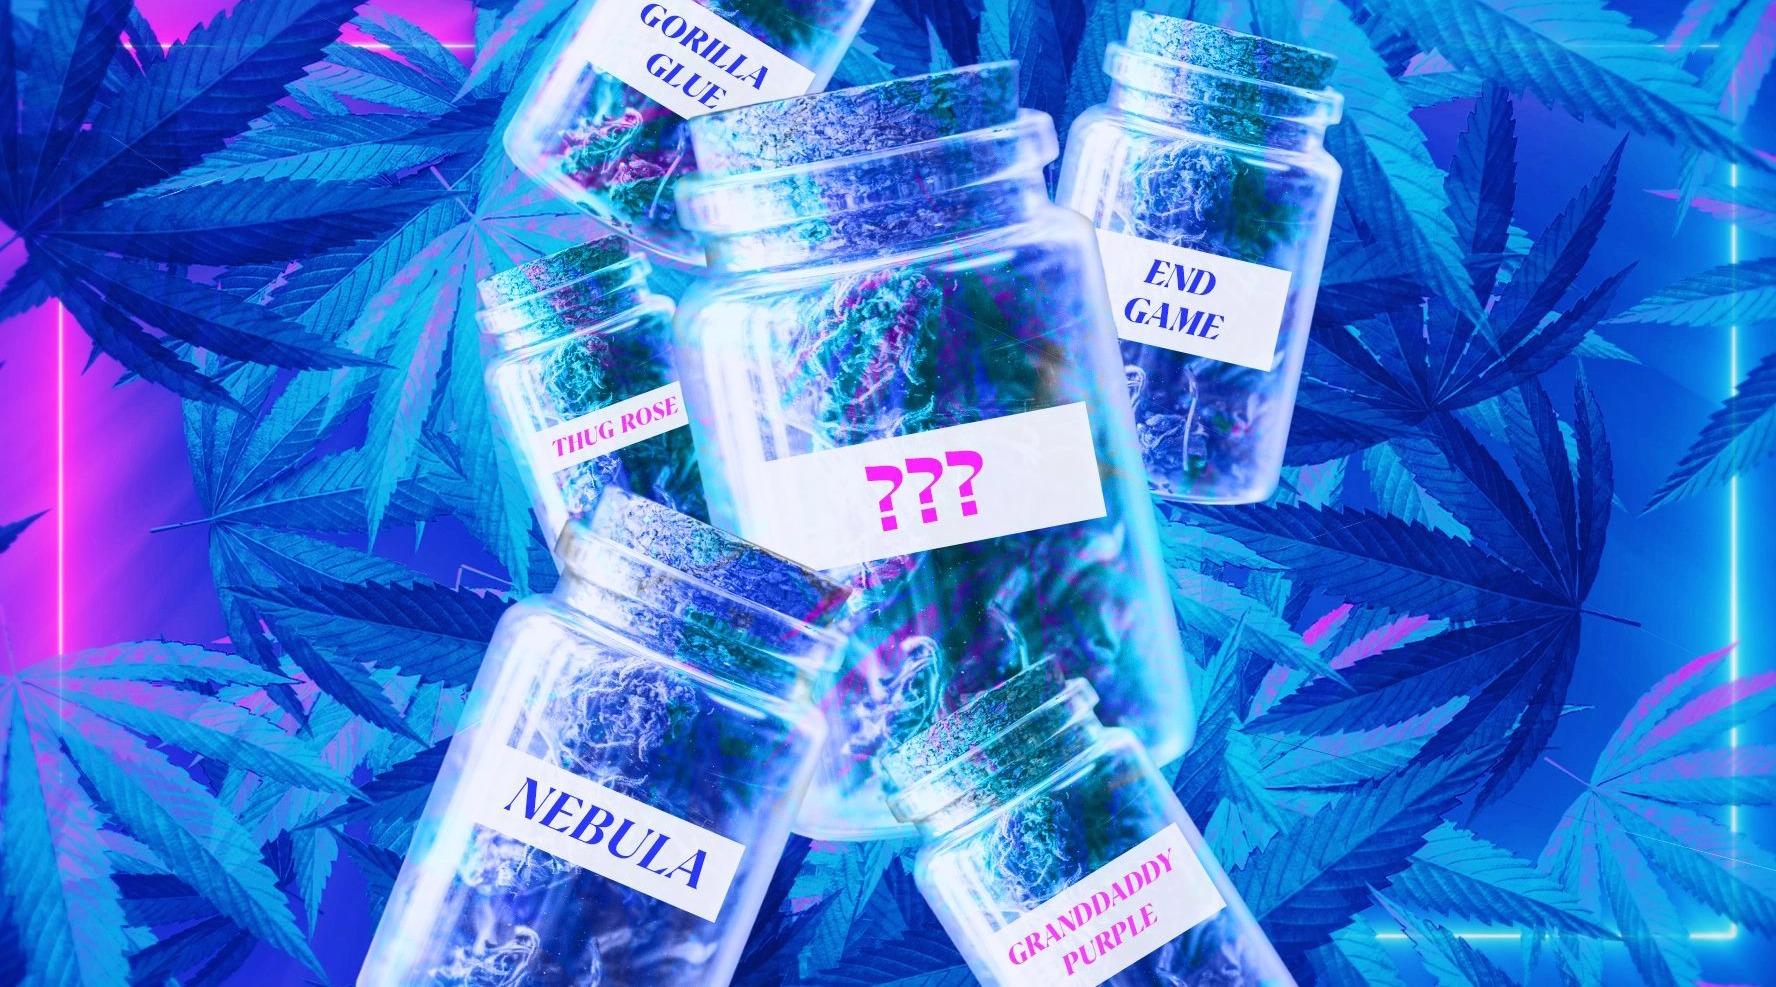 How Weed Strains Get Their (Amusing, Provocative, Downright Wacky) Names Durban Poison? Grandaddy Purple? Meat Breath? We go deep into the cannabis industry to find out how weed names are created—and how you know if this bud’s for you.